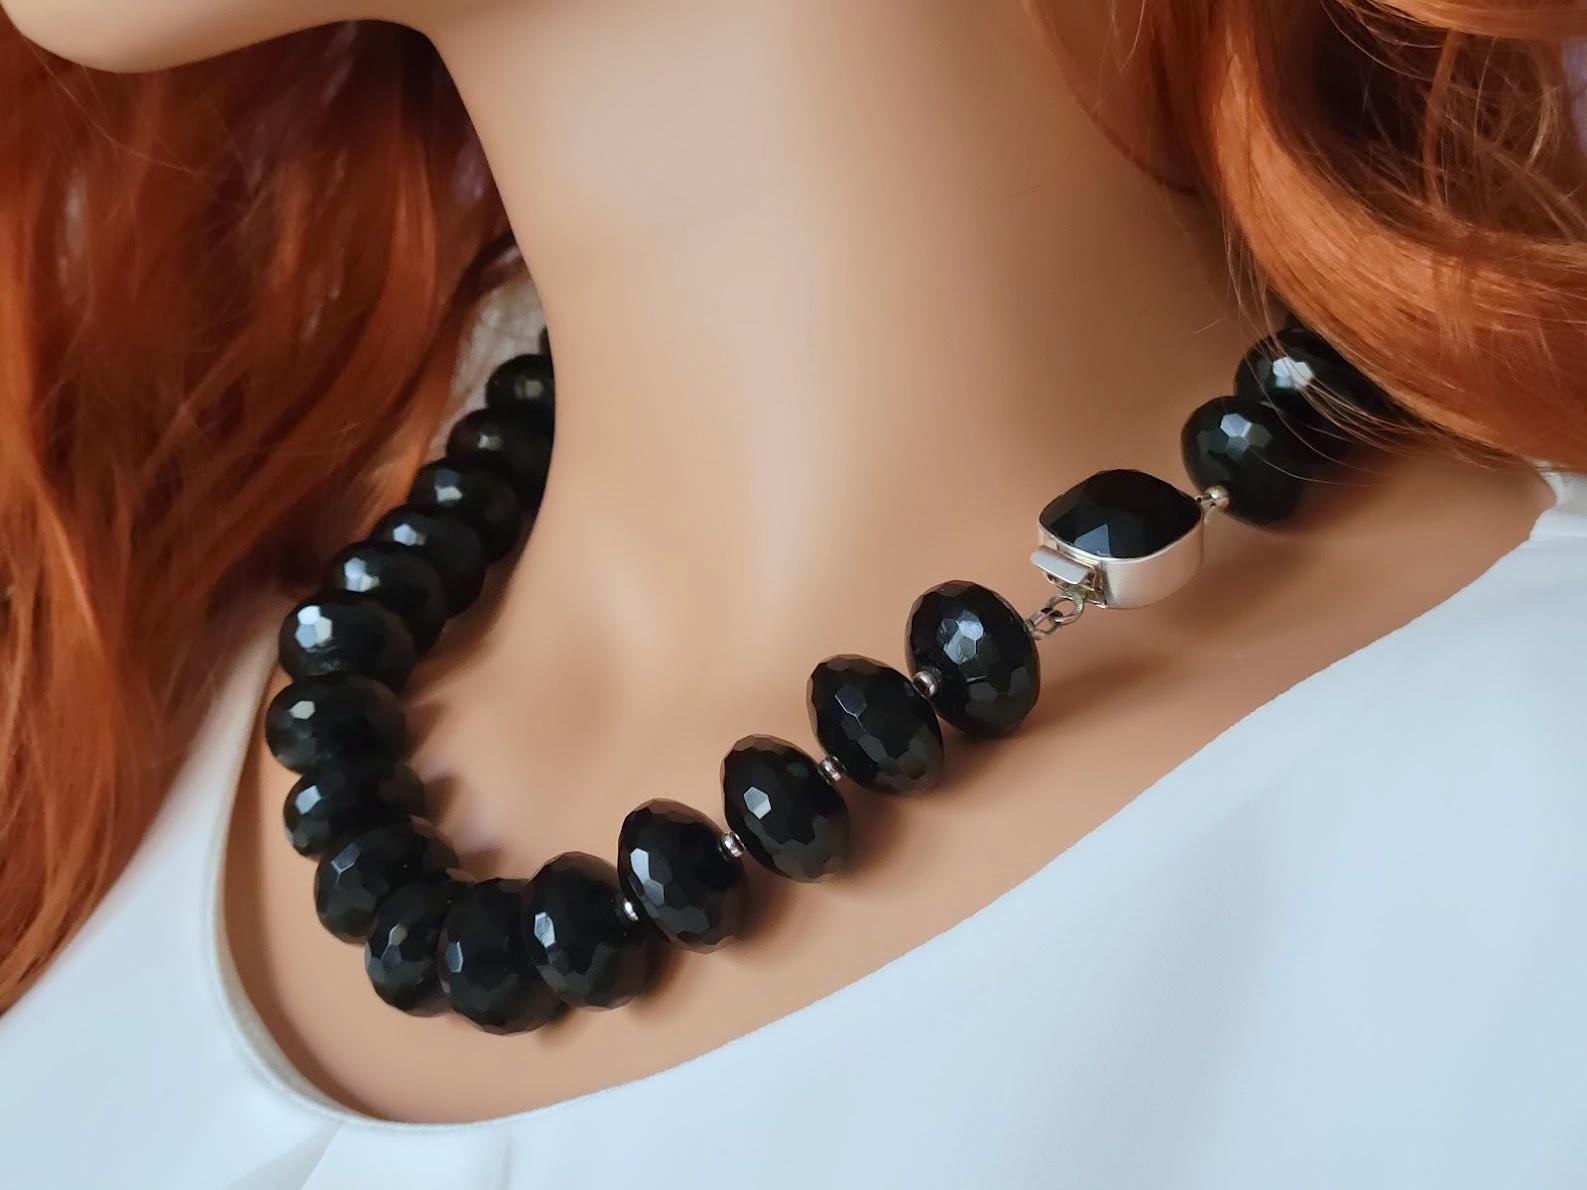 Black Onyx Necklace With Hand Painted Bead On Black Rectangular Agate For Sale 4